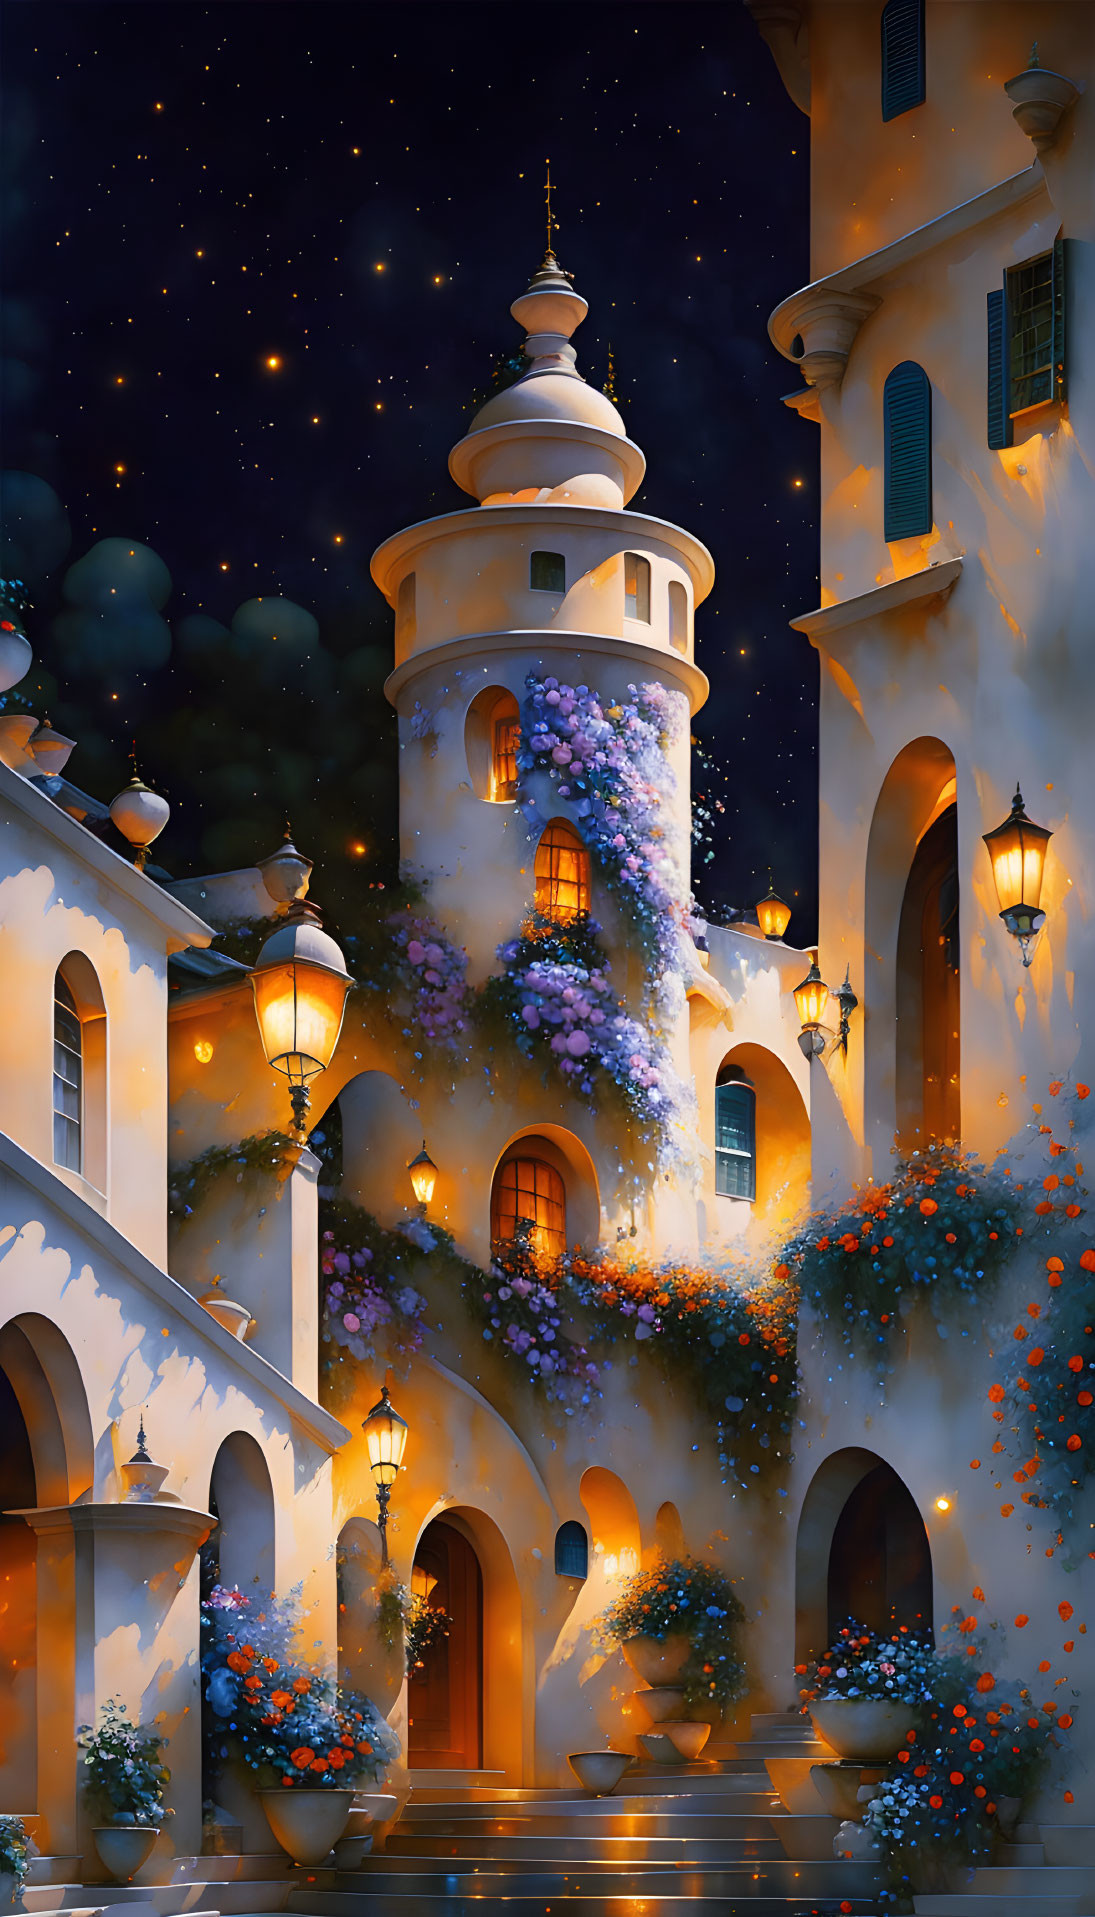 Enchanting night street with flower-adorned buildings and glowing lanterns